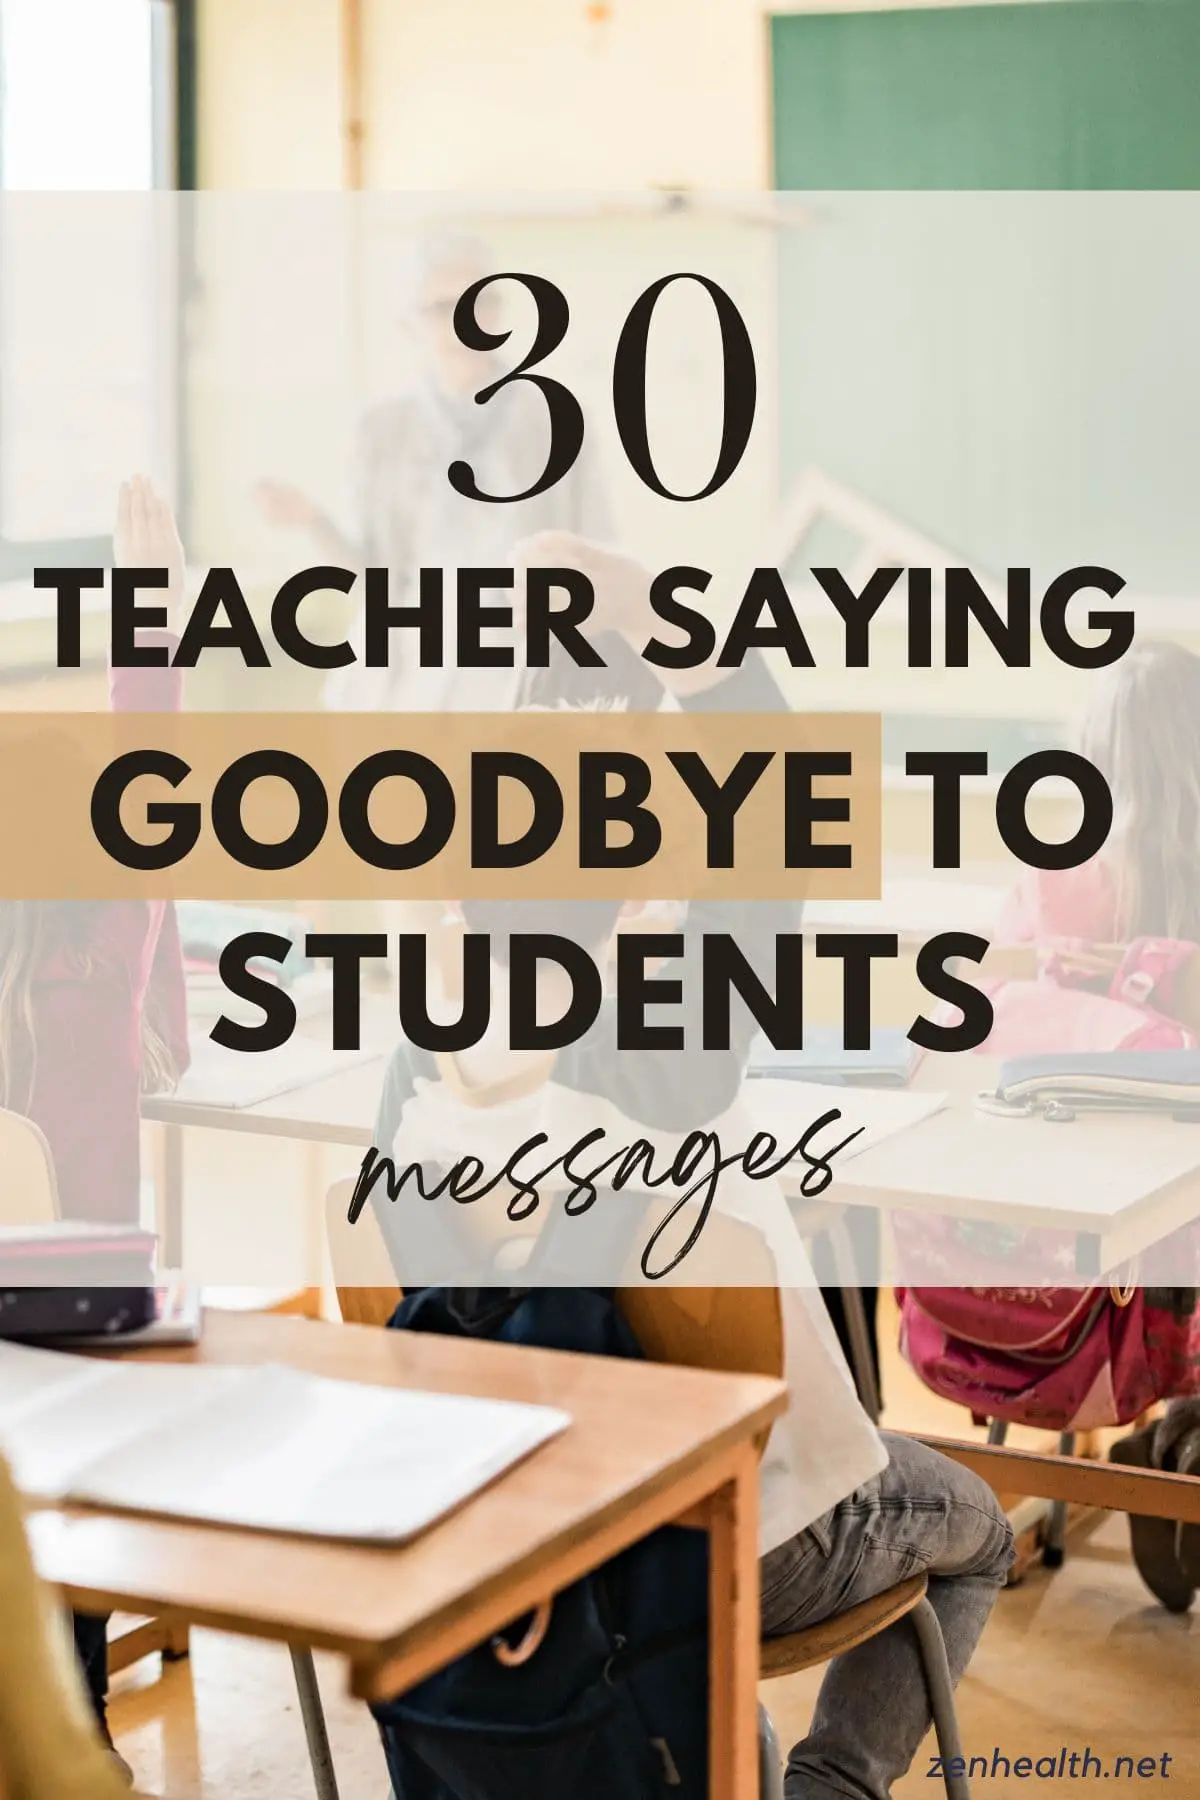 30 teacher saying goodbye to students messages text overlay on a photo of students raising their hands looking at a teacher in a classroom